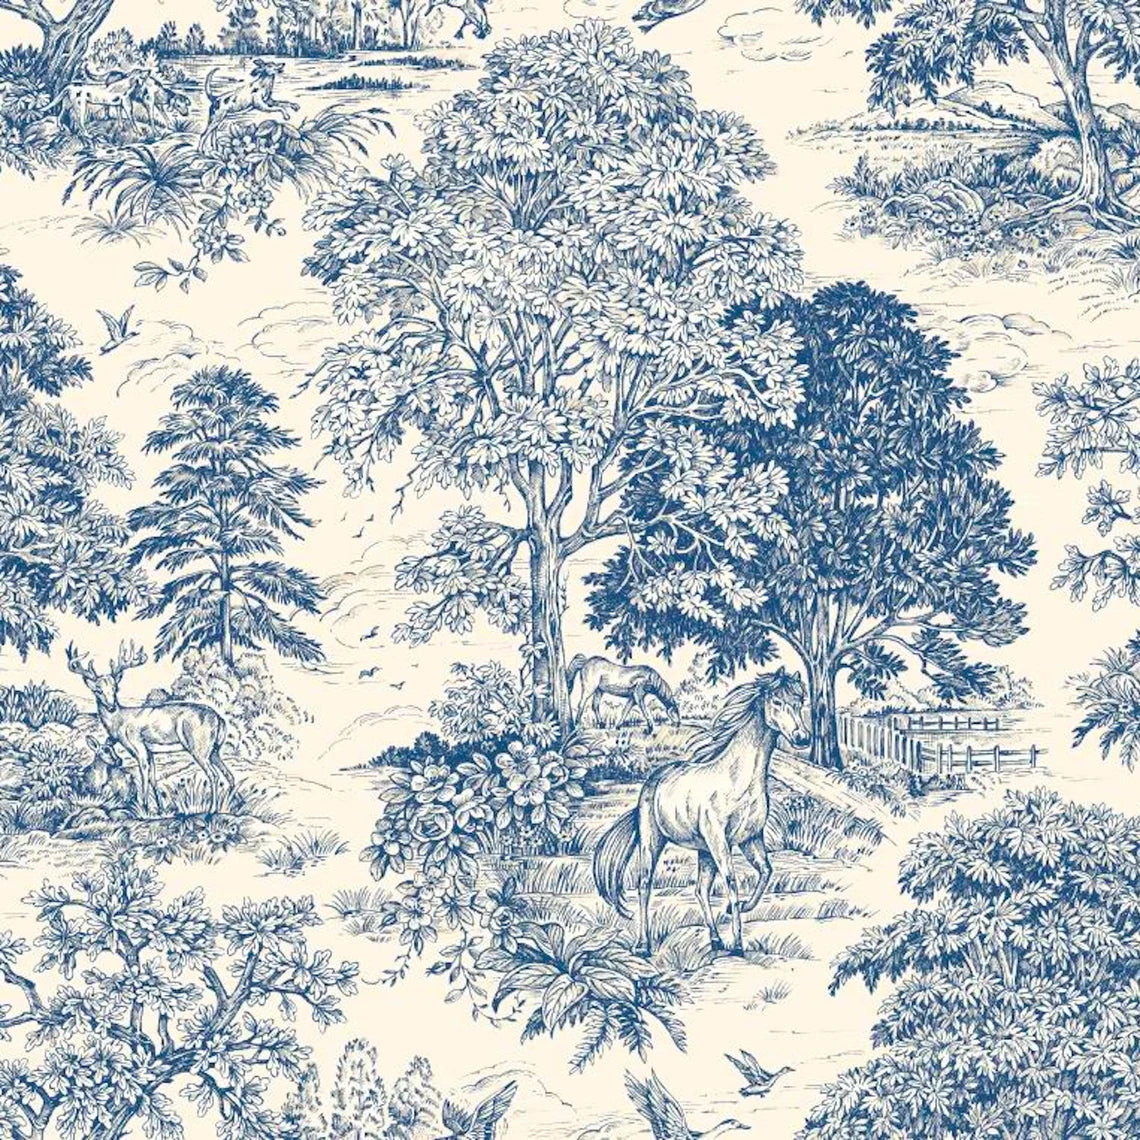 Bed Scarf in Yellowstone Bluebell Blue Country Toile- Horses, Deer, Dogs- Large Scale